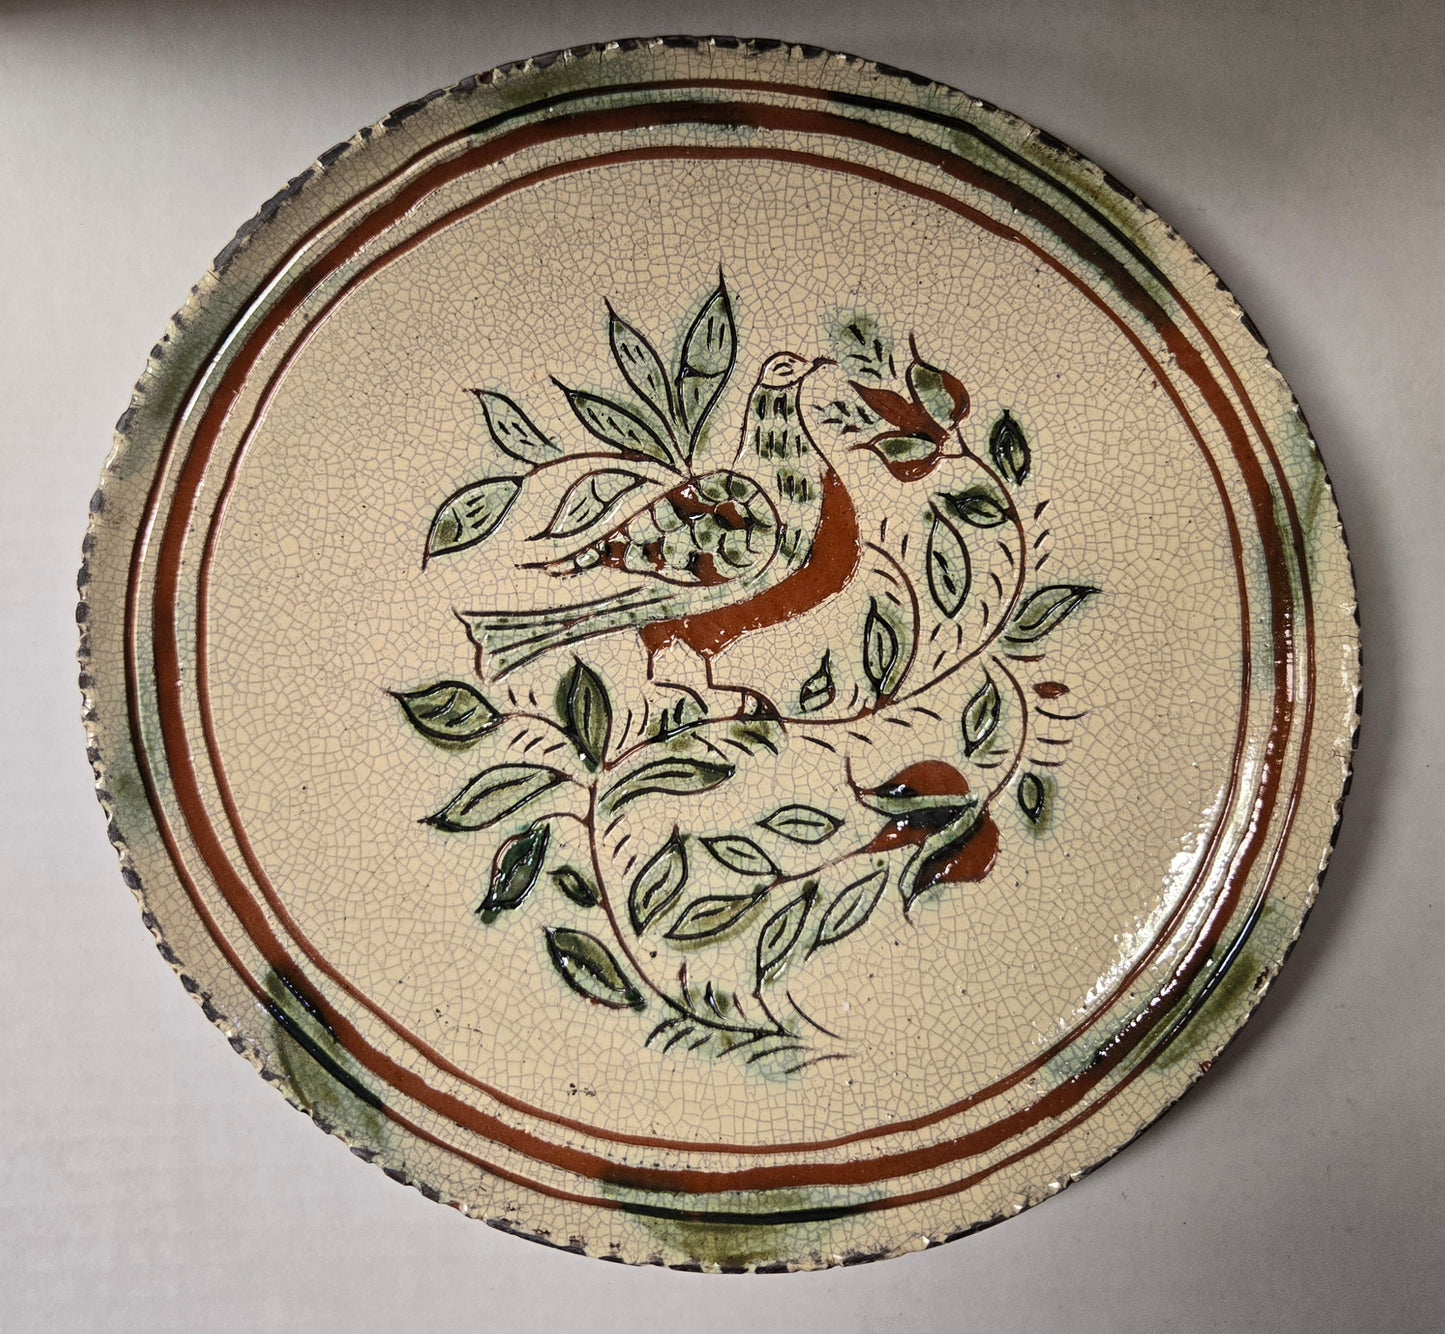 Collection of 8" Round Plates - Turtle Creek Pottery from the Workshops of David T. Smith